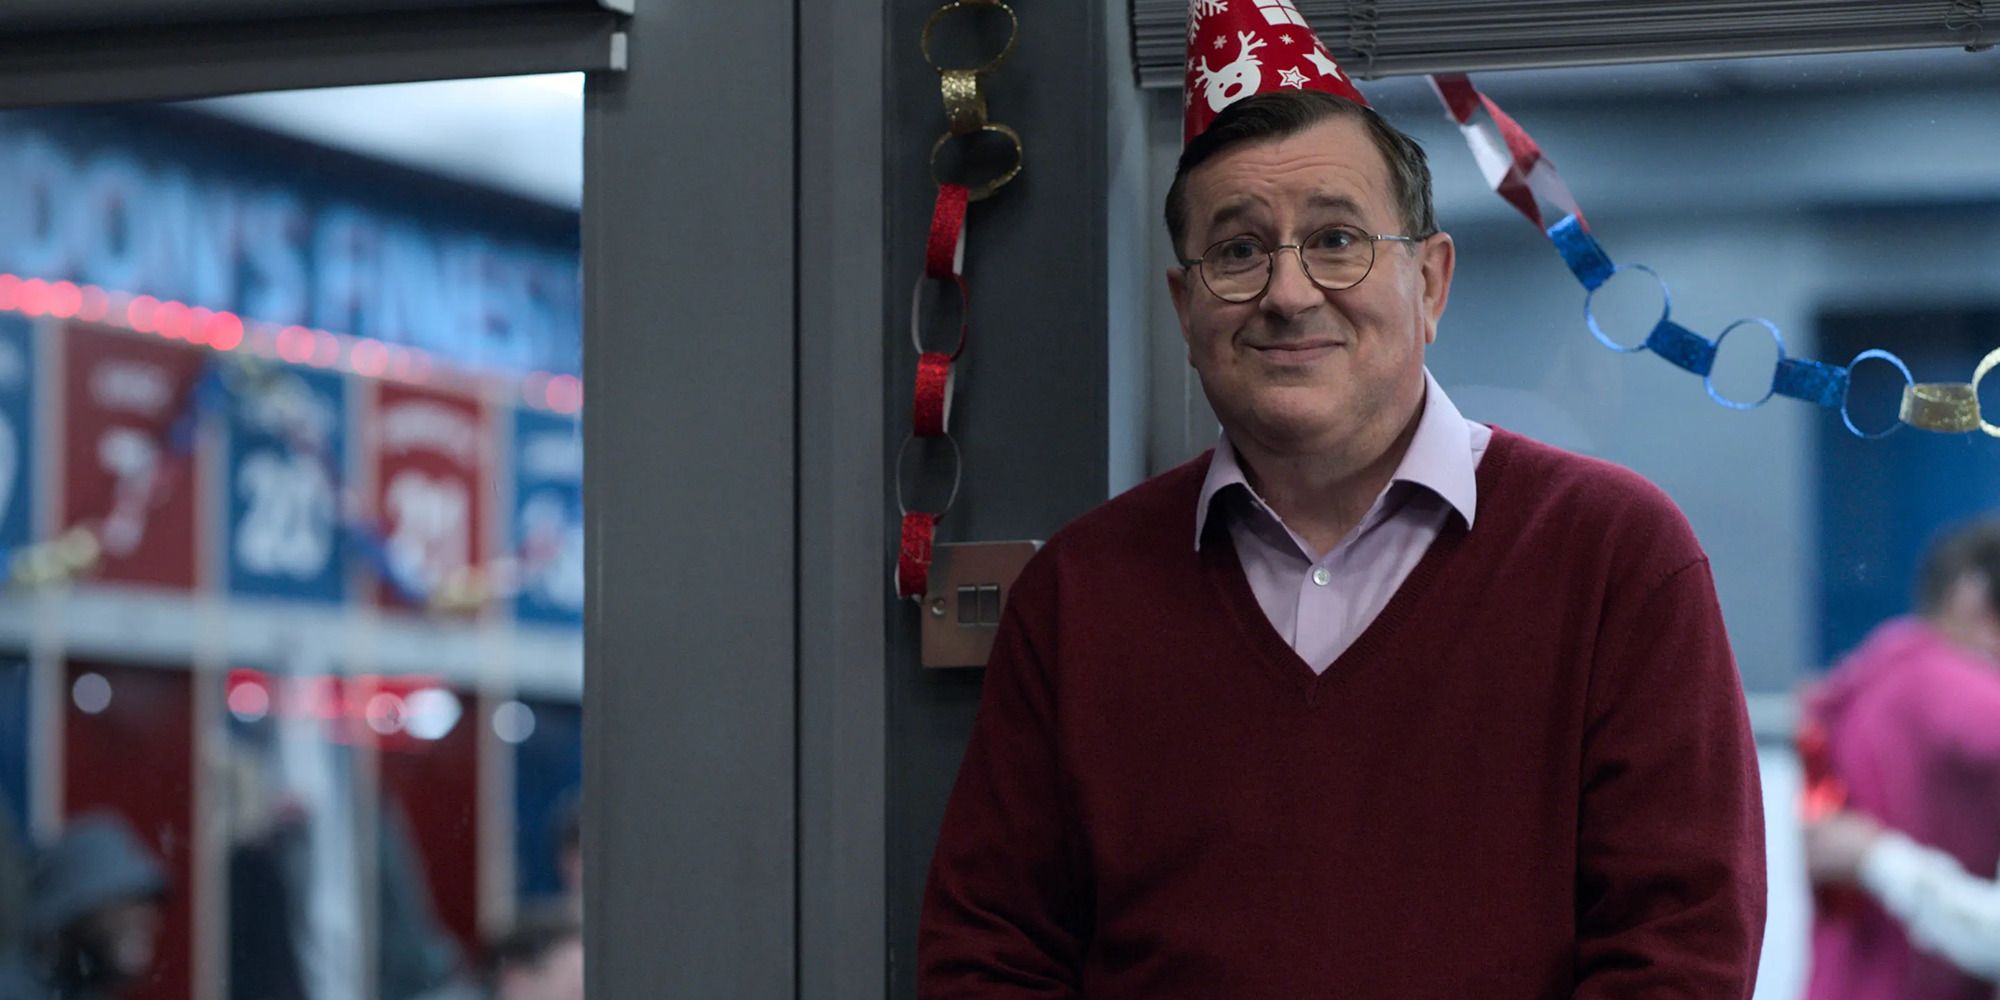 a man with a sweater, party hat, and awkward expression